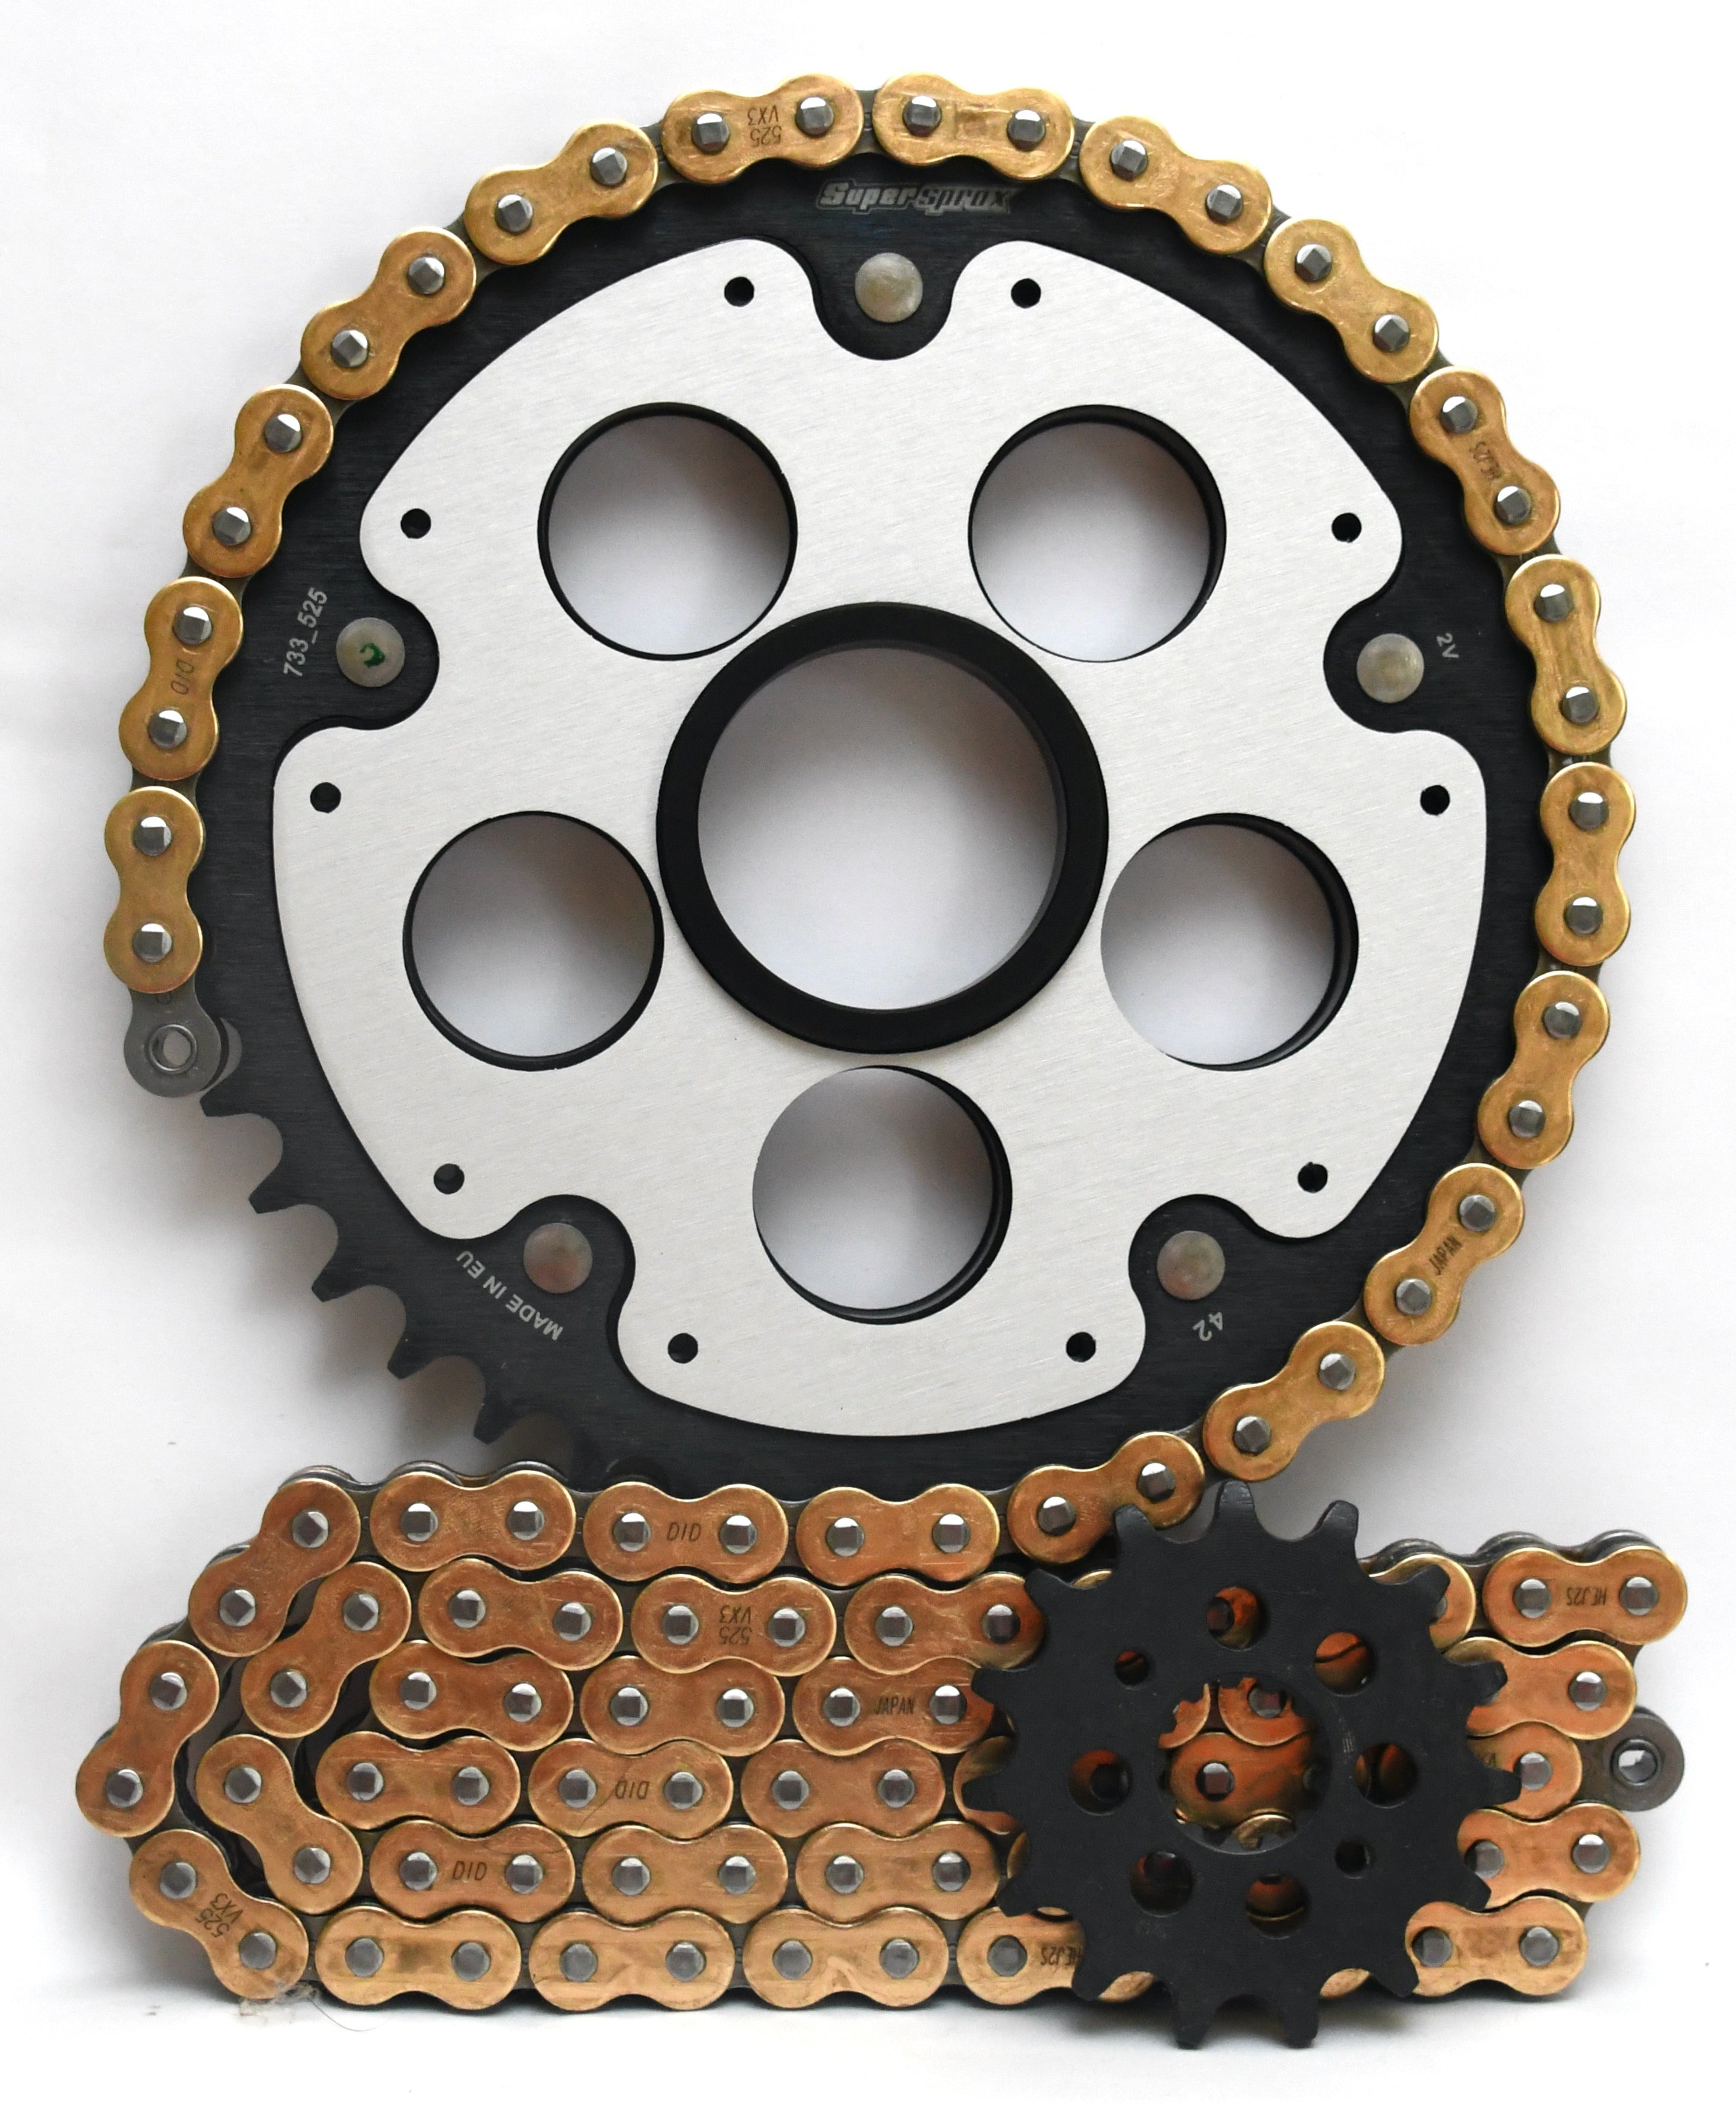 Supersprox Chain & Sprocket Kit for Ducati Monster S4R 996 2004-2006 - Standard Gearing